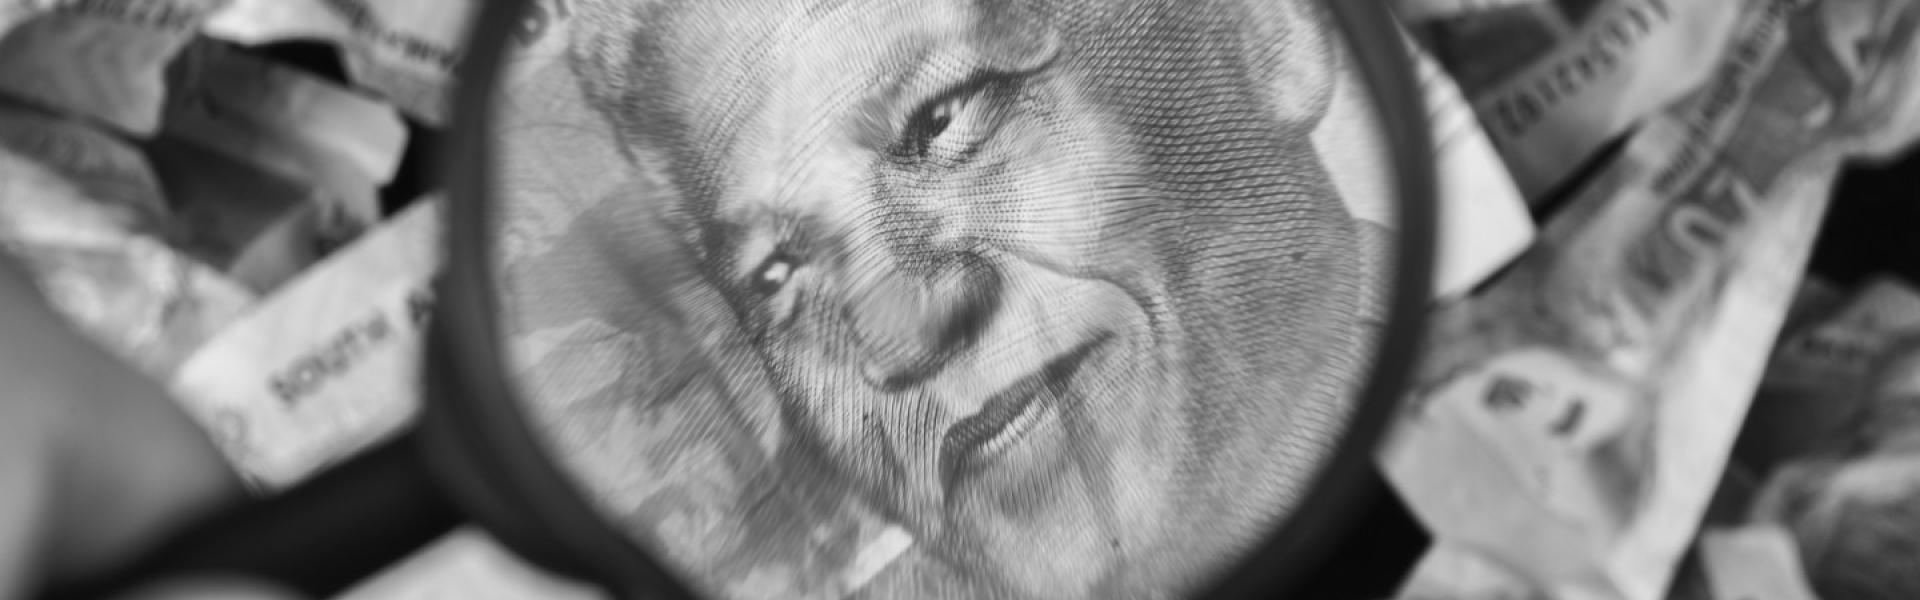 elson Mandela’s face magnified with a magnifying glass on a South African 100 Rand note with crumpled Rand notes in the background